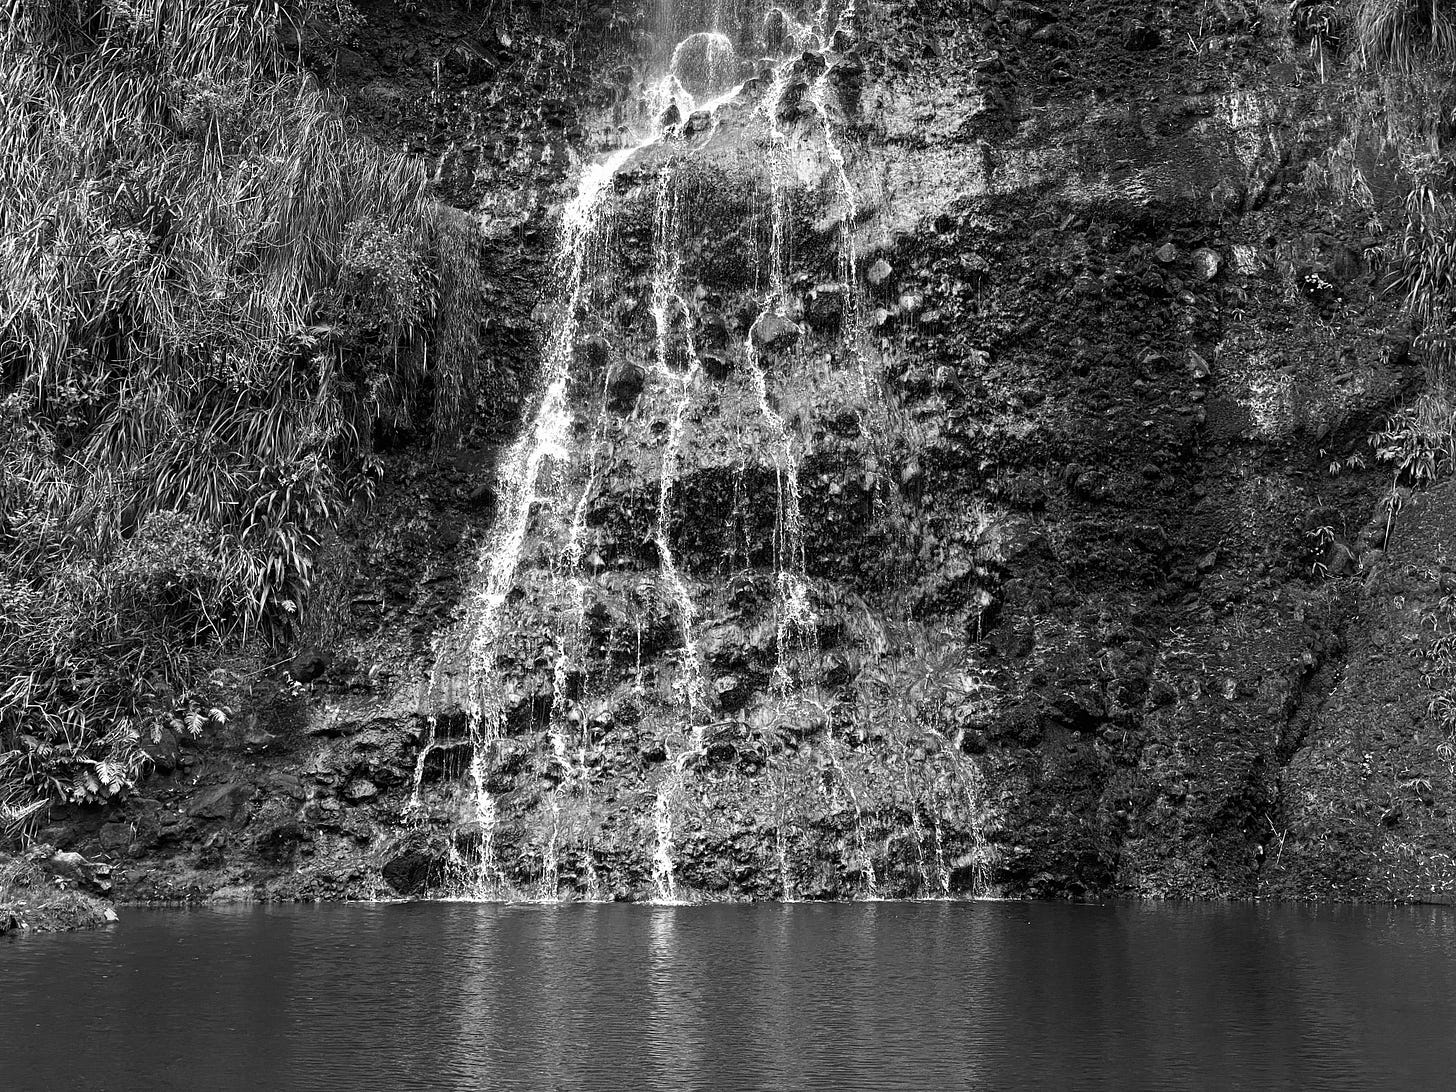 Photo of a small waterfall branching and flowing in several thin strands down a vertical, rocky hillside into a calm pool.